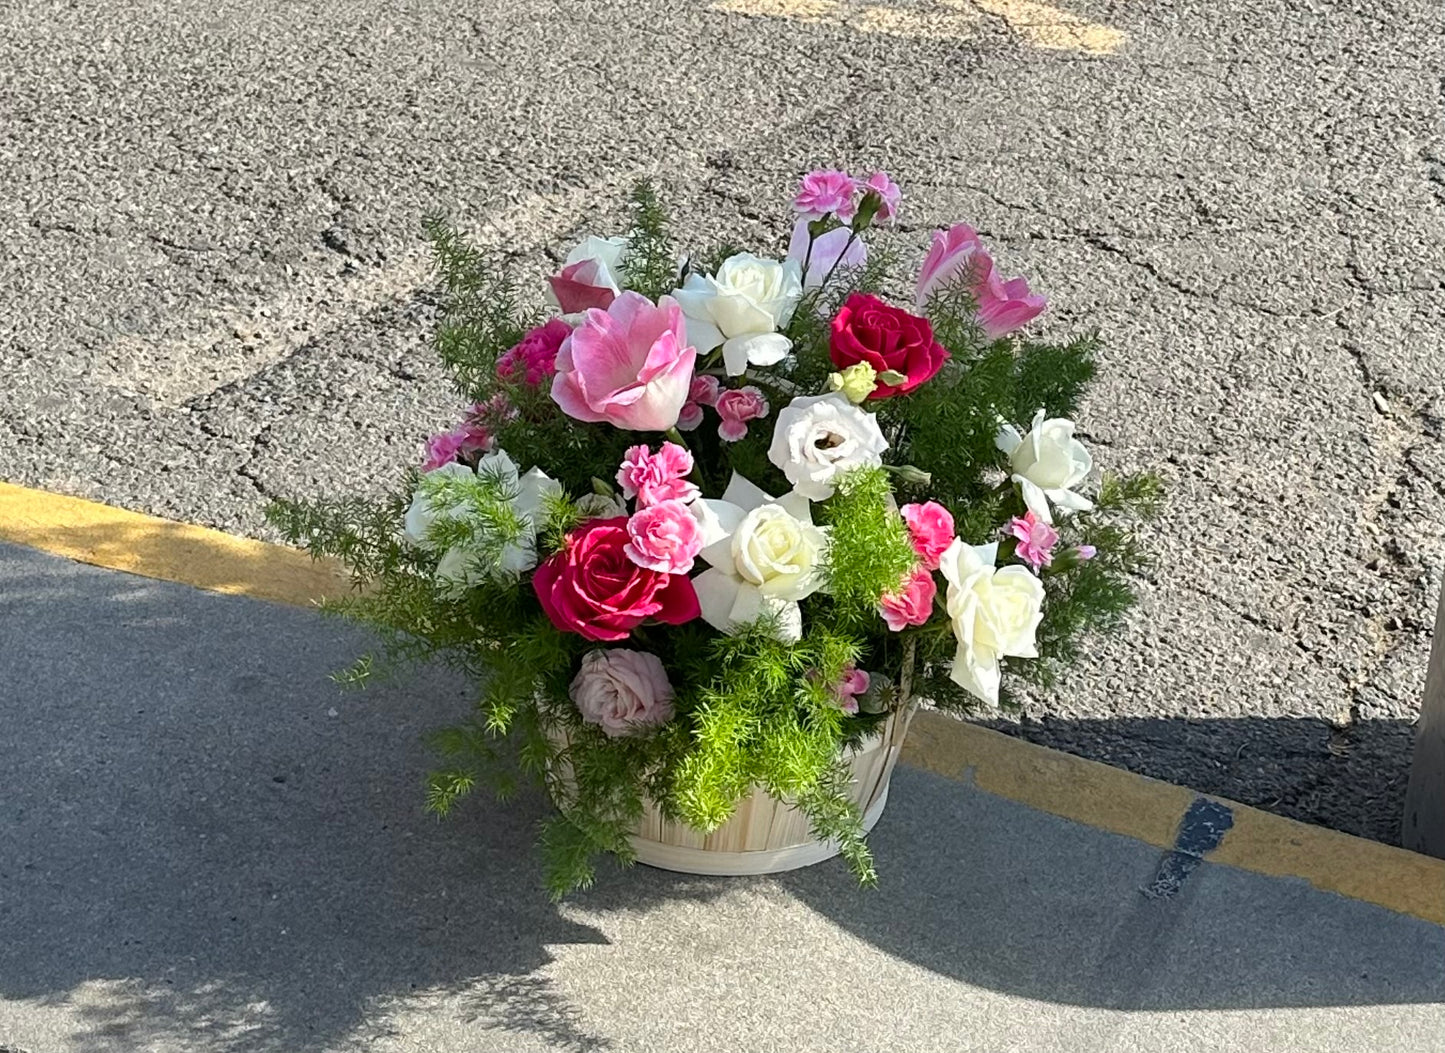 The Mother’s Day Bouquet